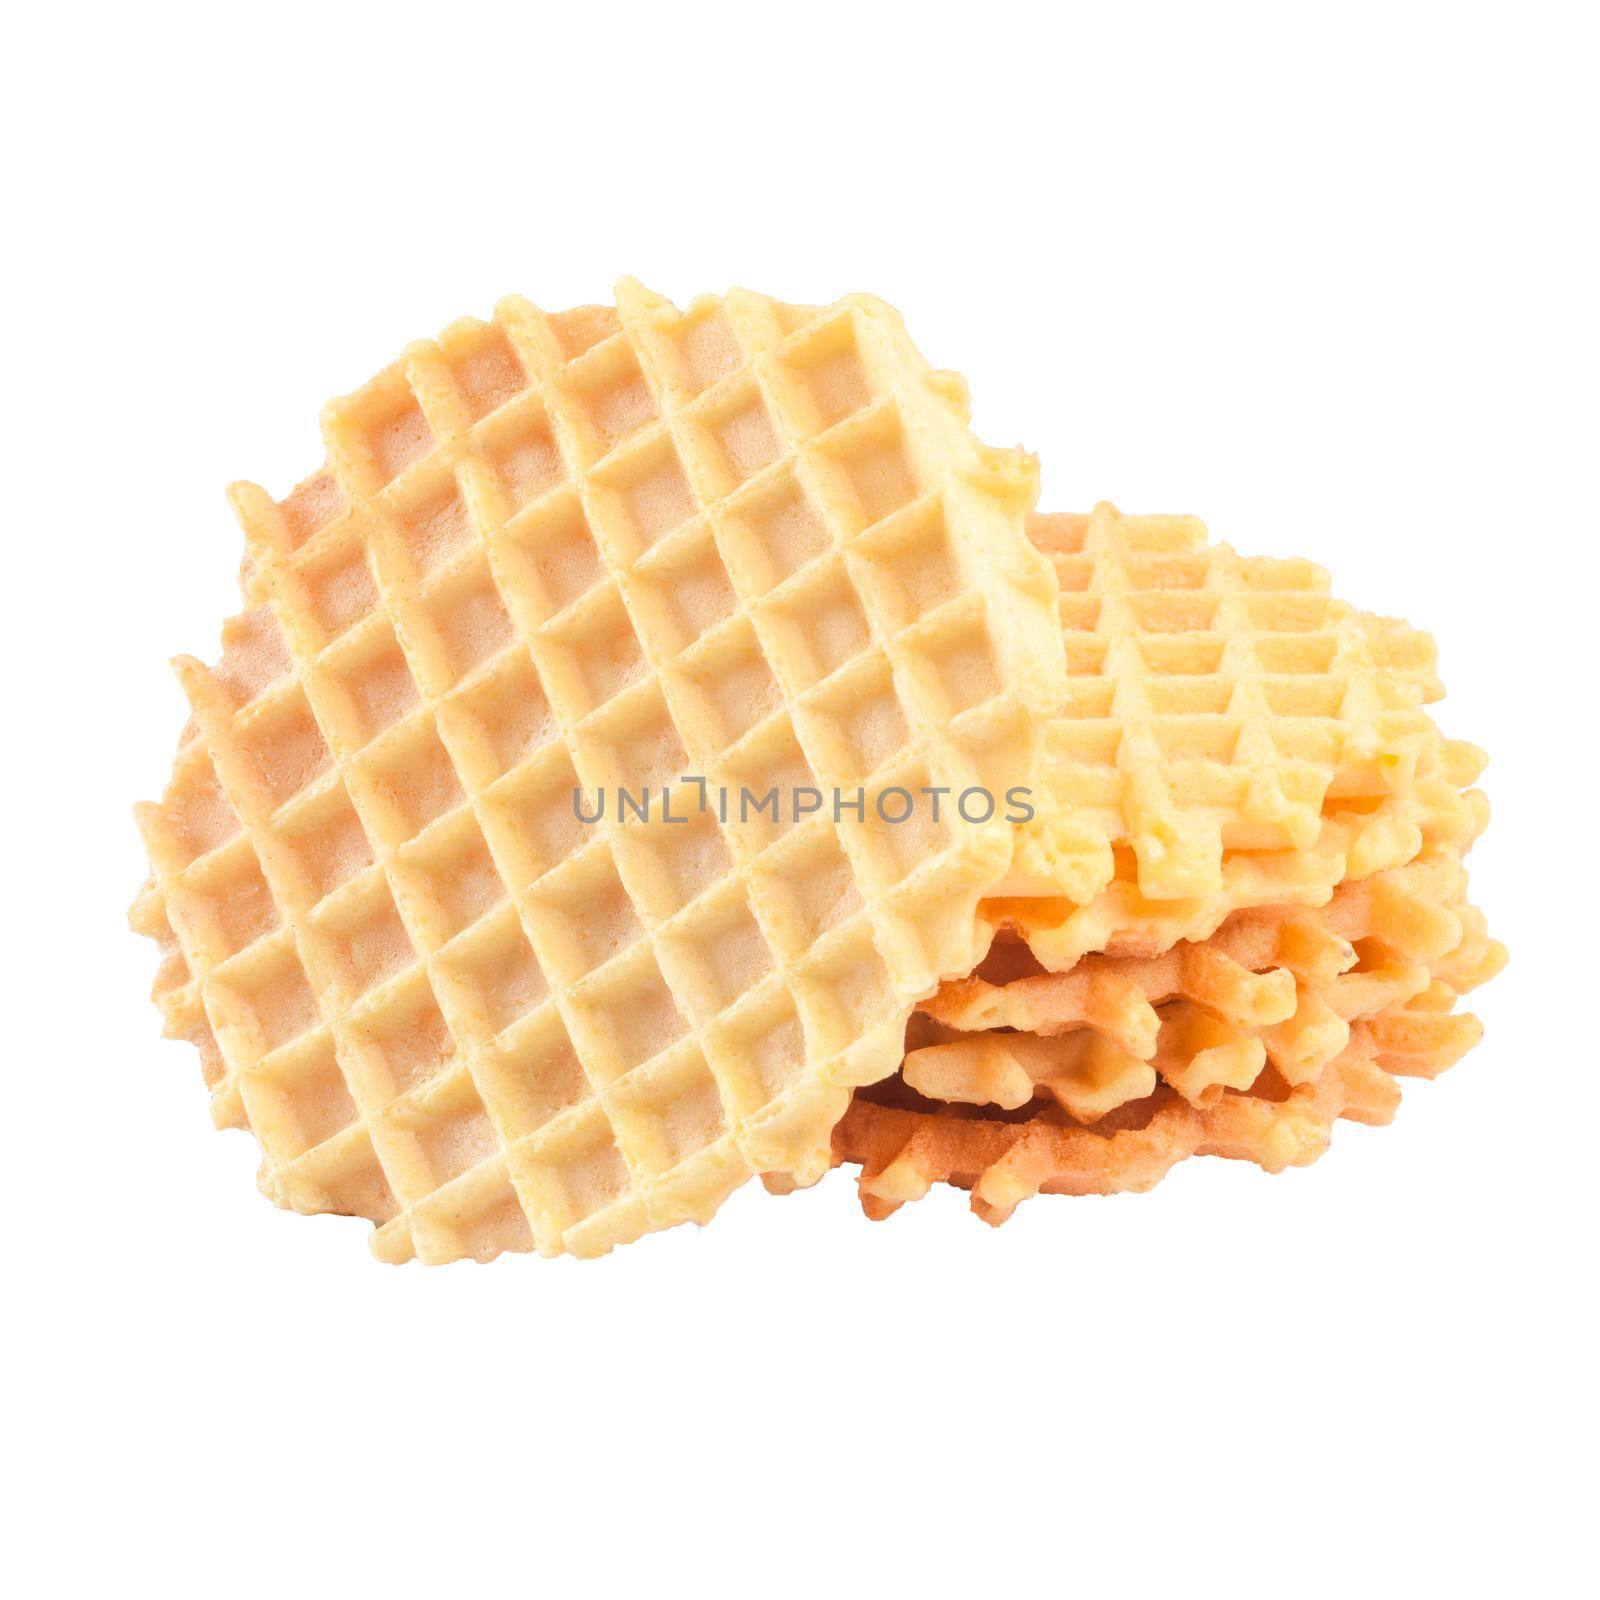 Stack of golden round waffles isolated on white background. Popular dessert pastry